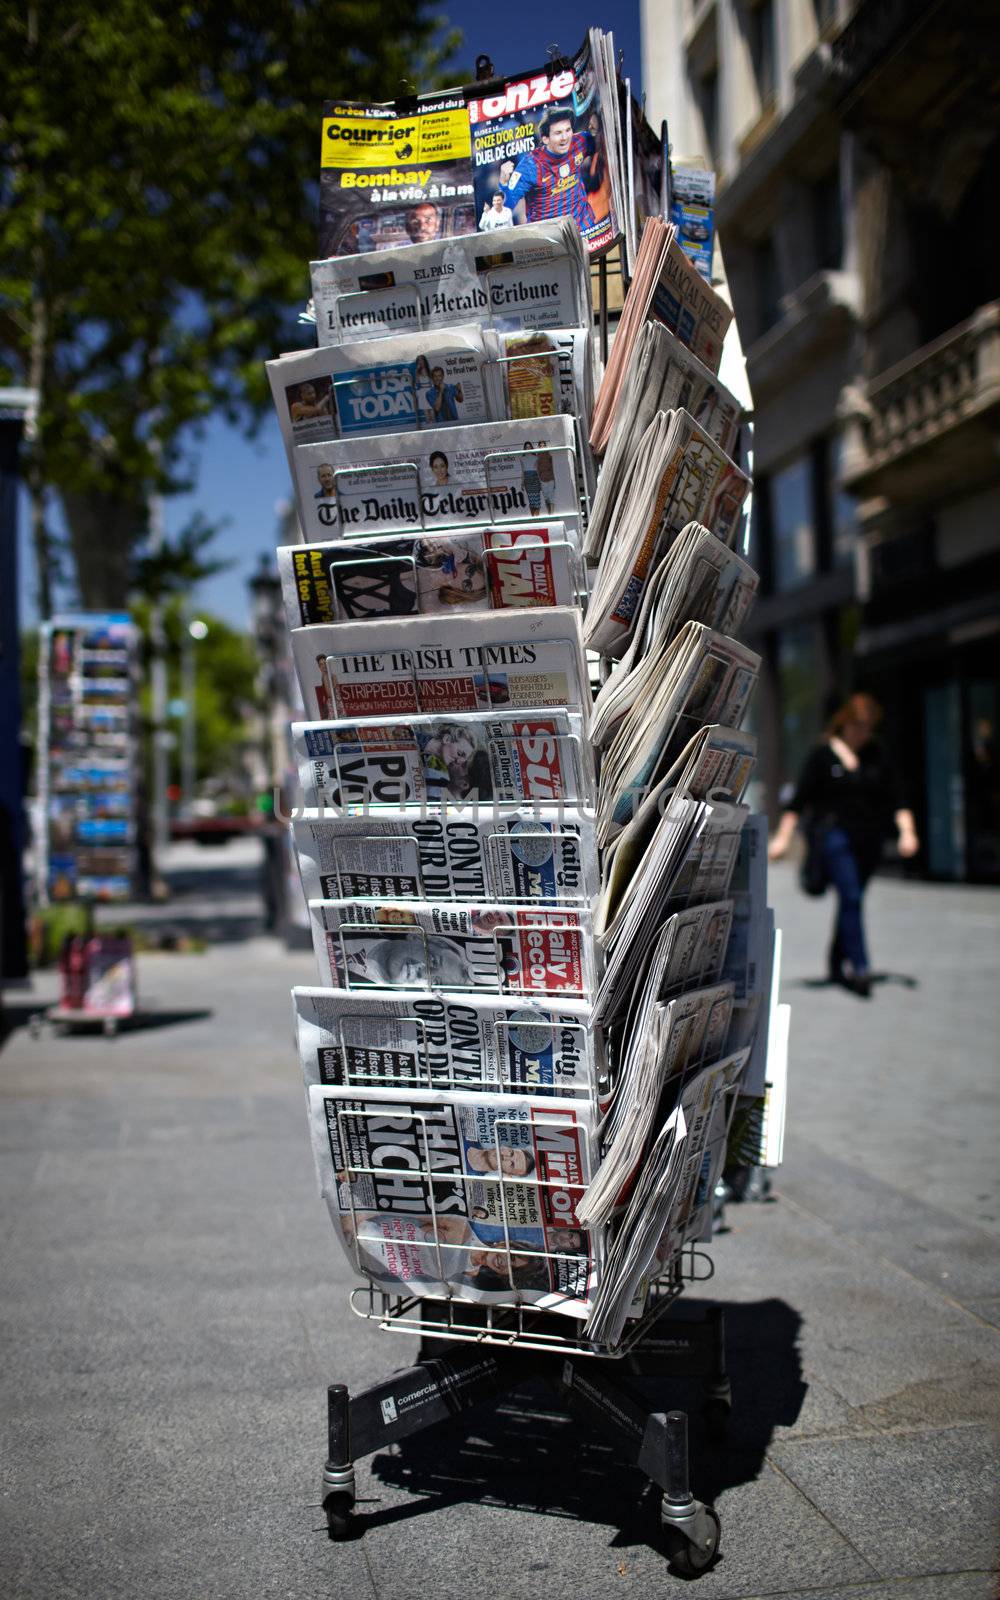 BARCELONA - MAY 23:  A newspaper pole on a street on May, 23, 2012 in Barcelona, Spain.